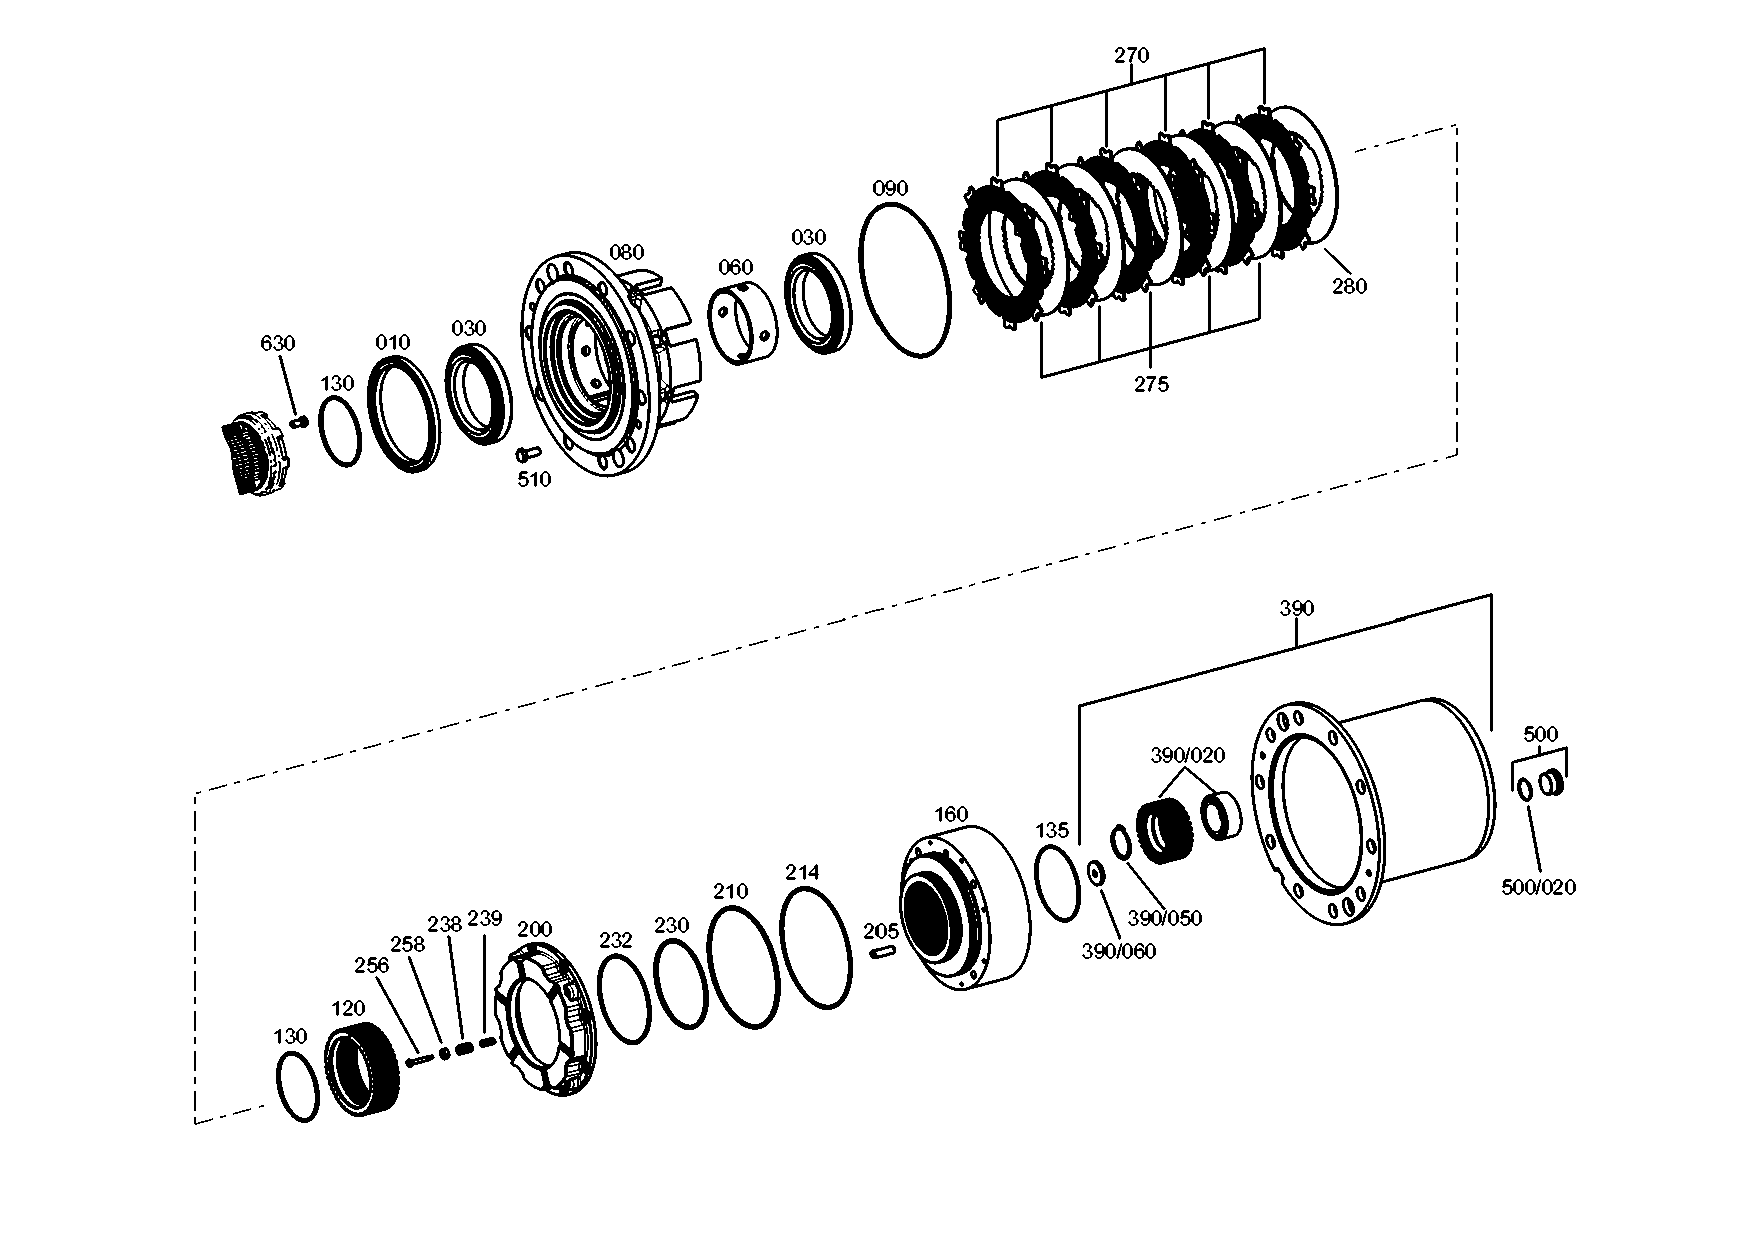 drawing for E. N. M. T. P. / CPG 0501 323 004 - OUTER CLUTCH DISK (figure 2)